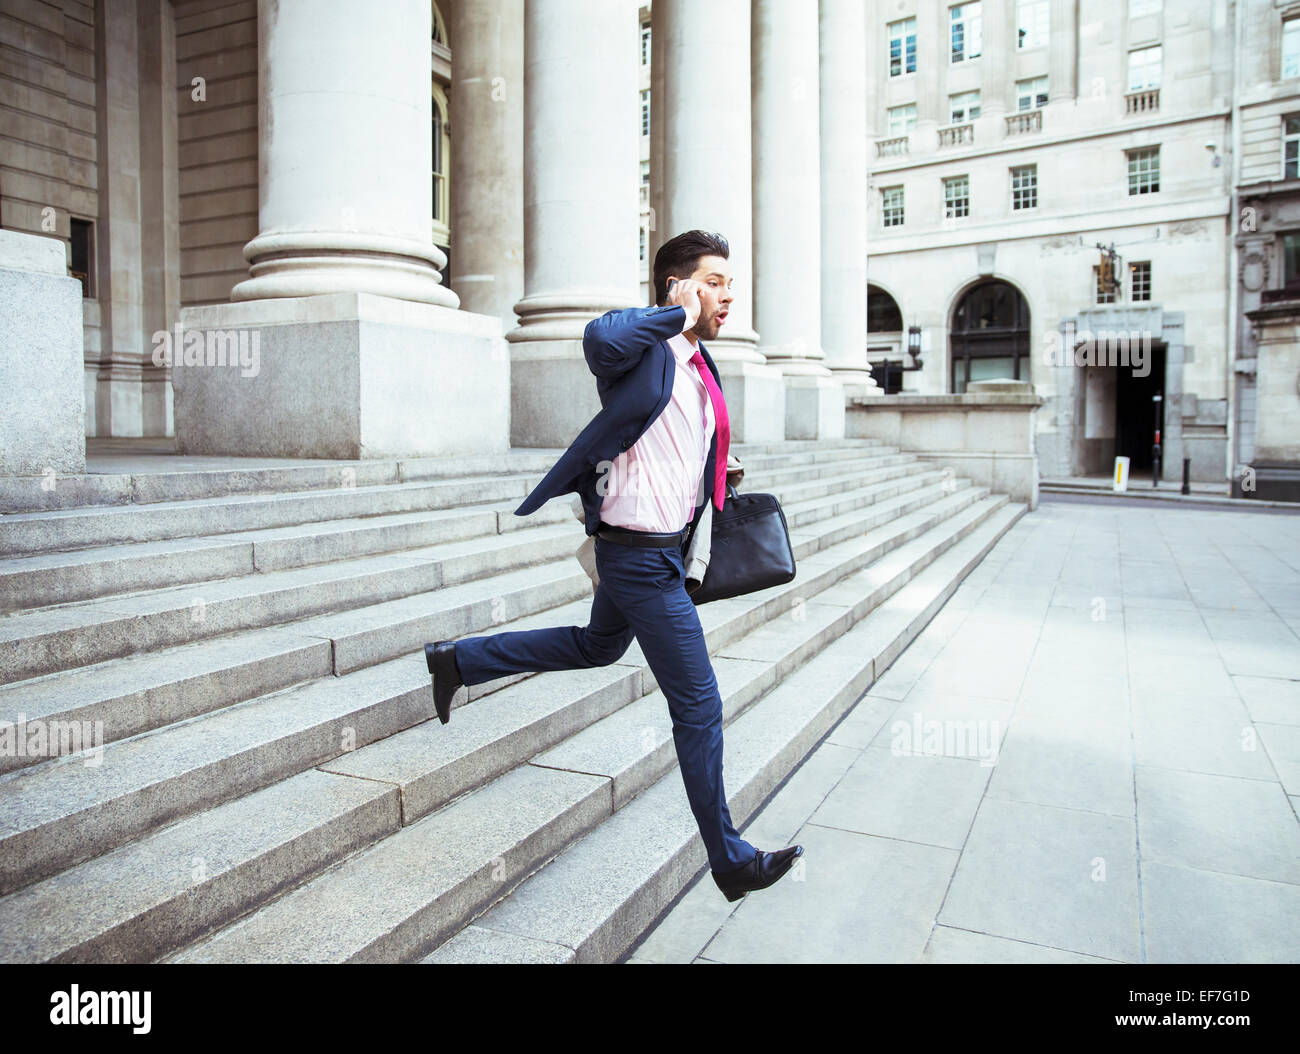 Businessman on cell phone running on city staircase Stock Photo